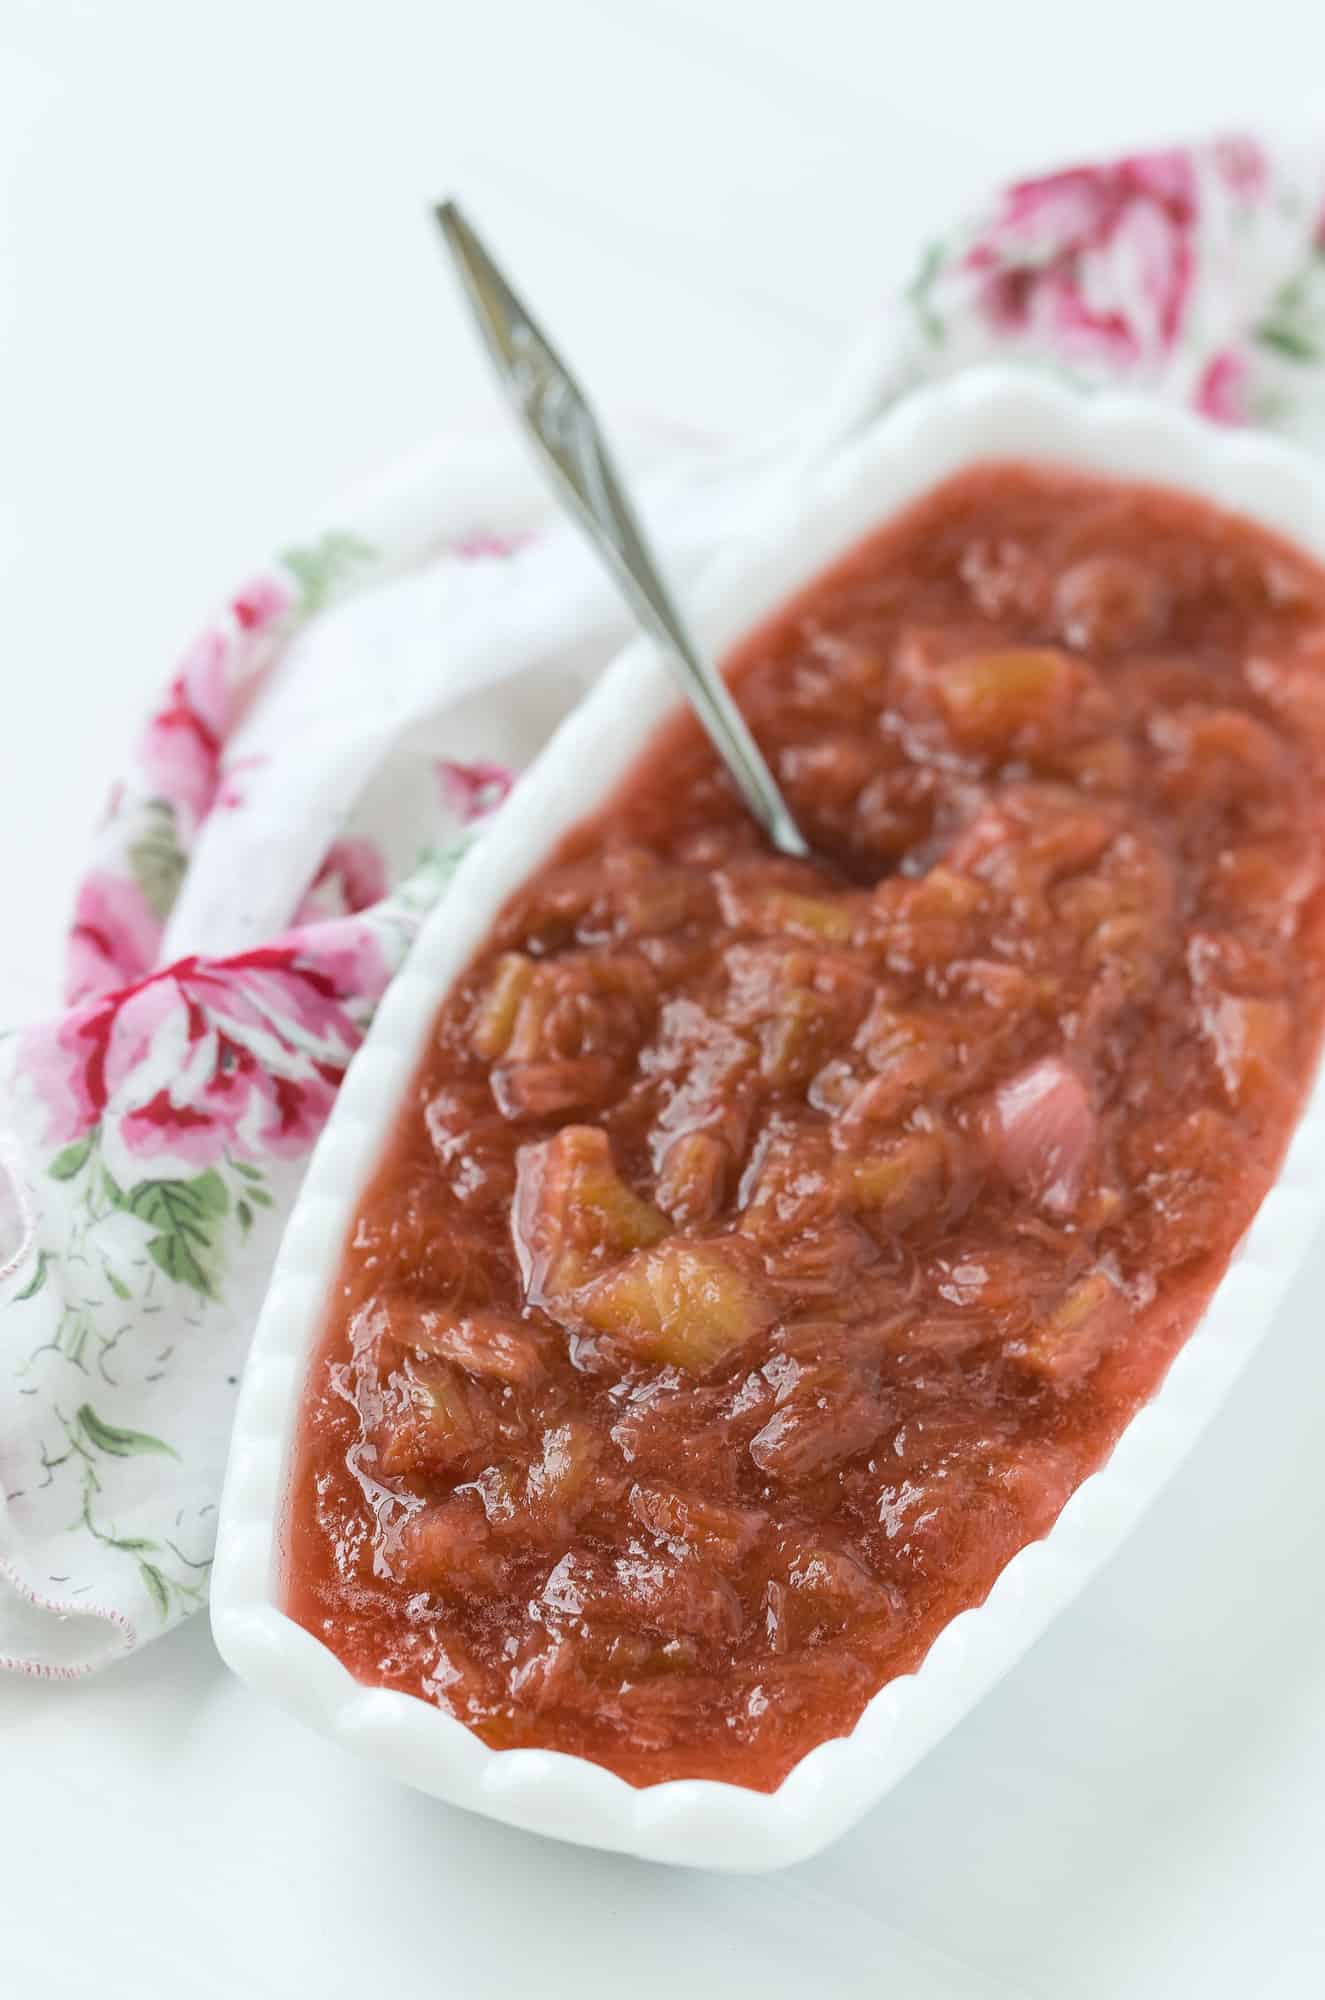 Light red rhubarb sauce in an oval shaped white bowl, with a spoon.